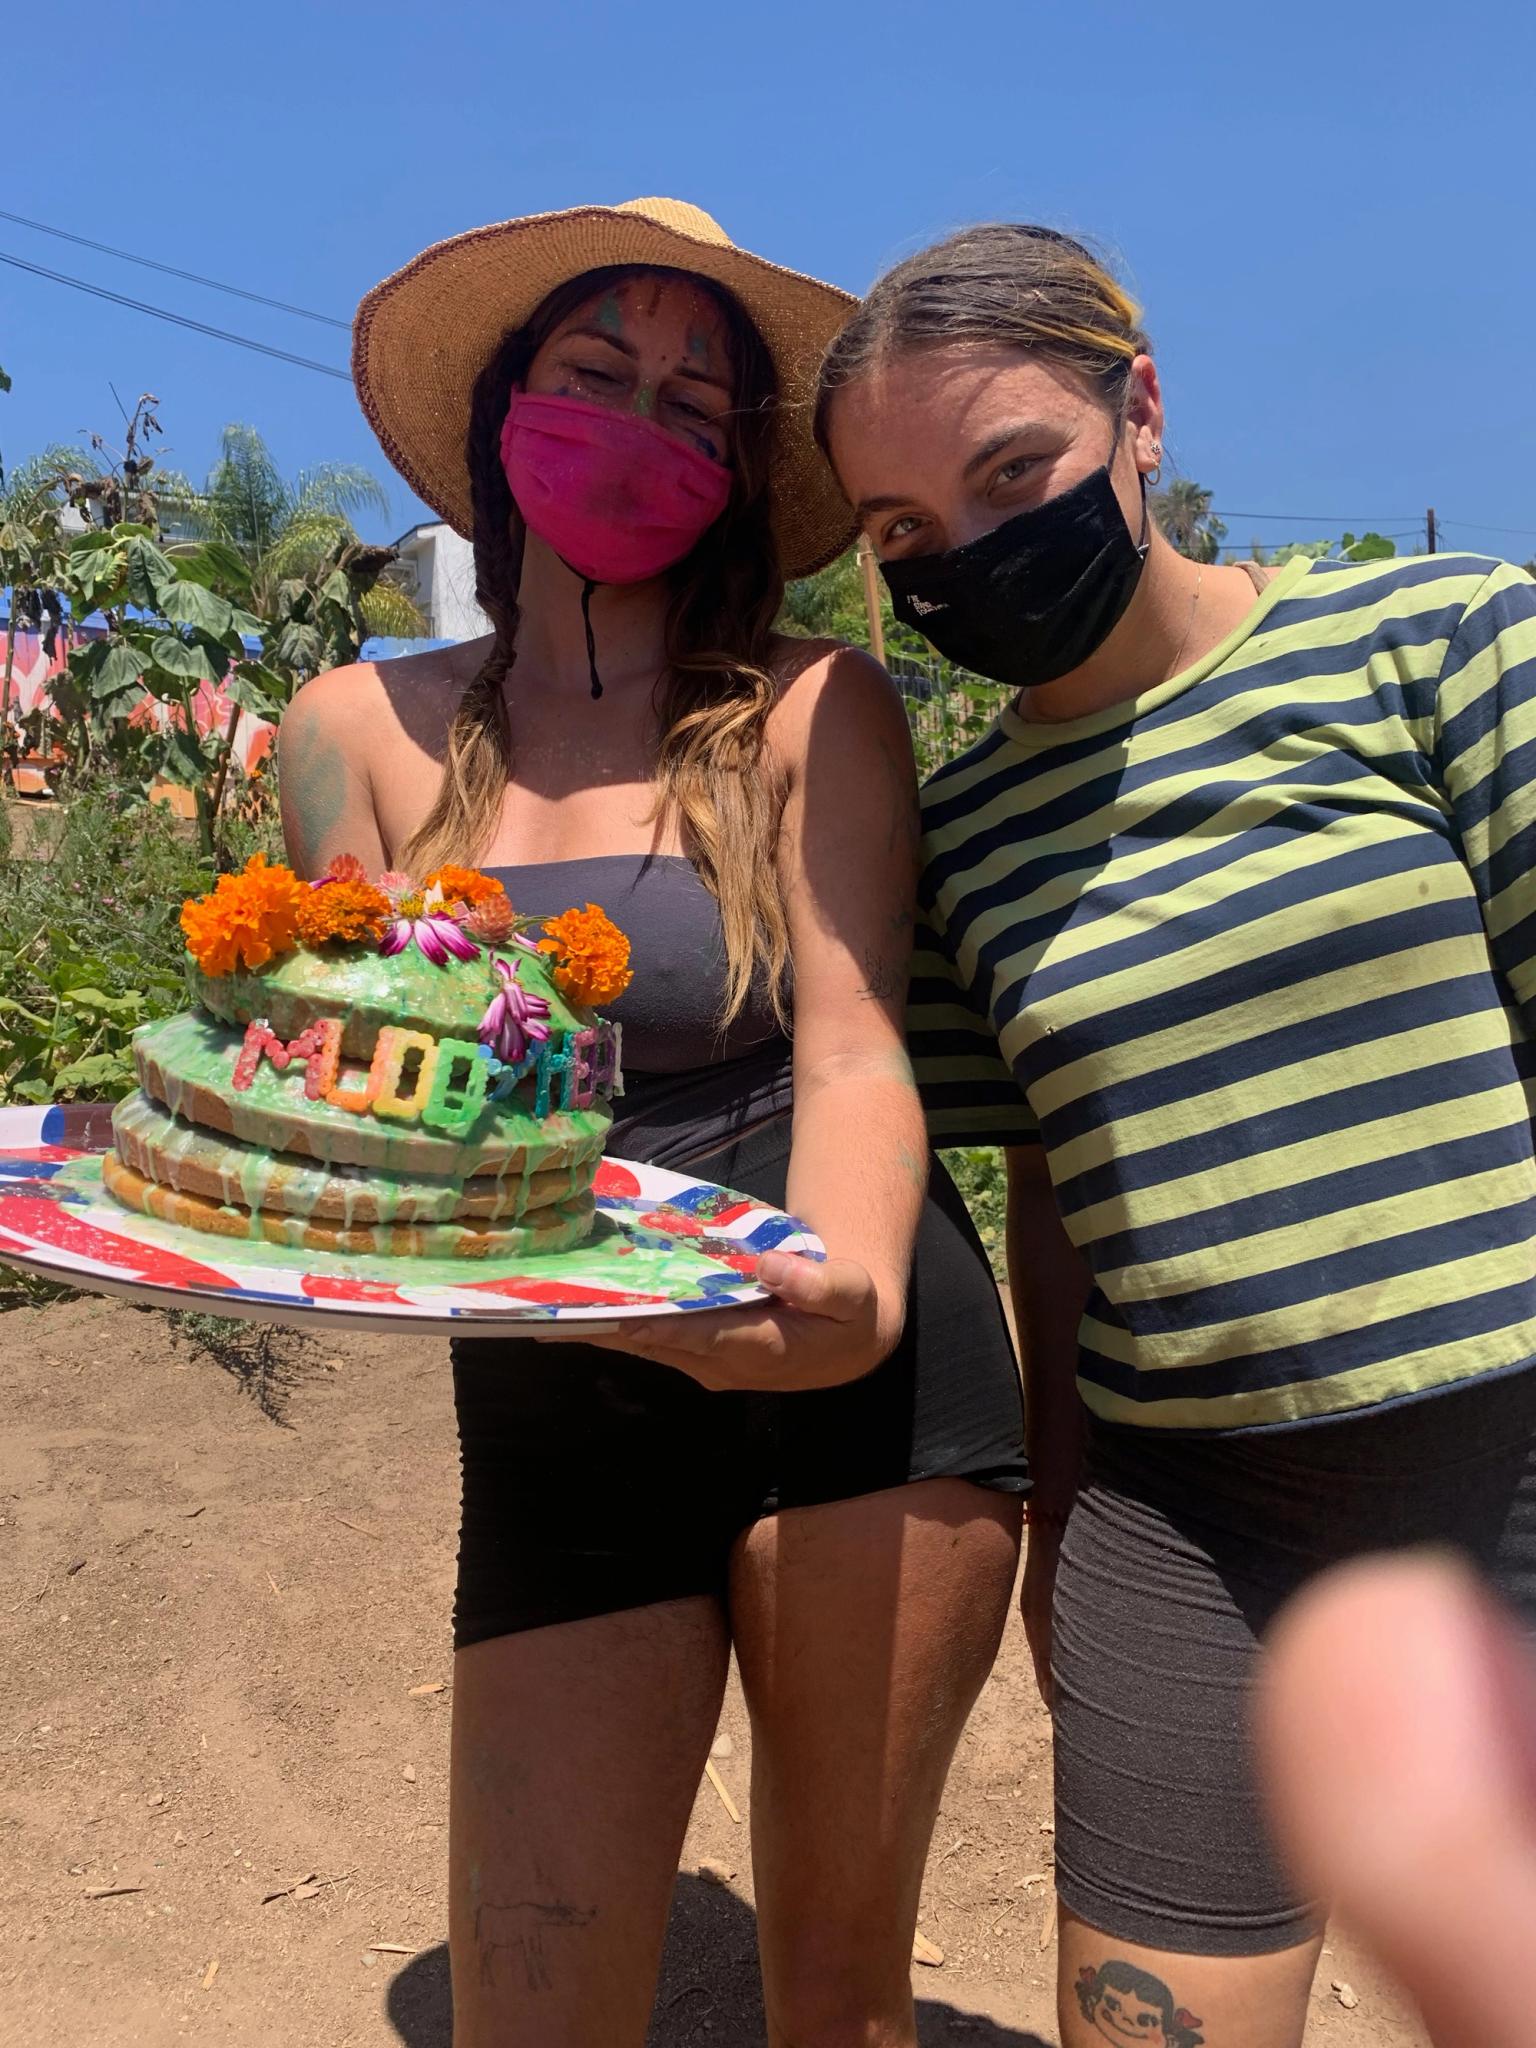 Two people wearing masks, person on the left is holding a tray with a cake with drippy green icing and the lettings Muddy Heaven